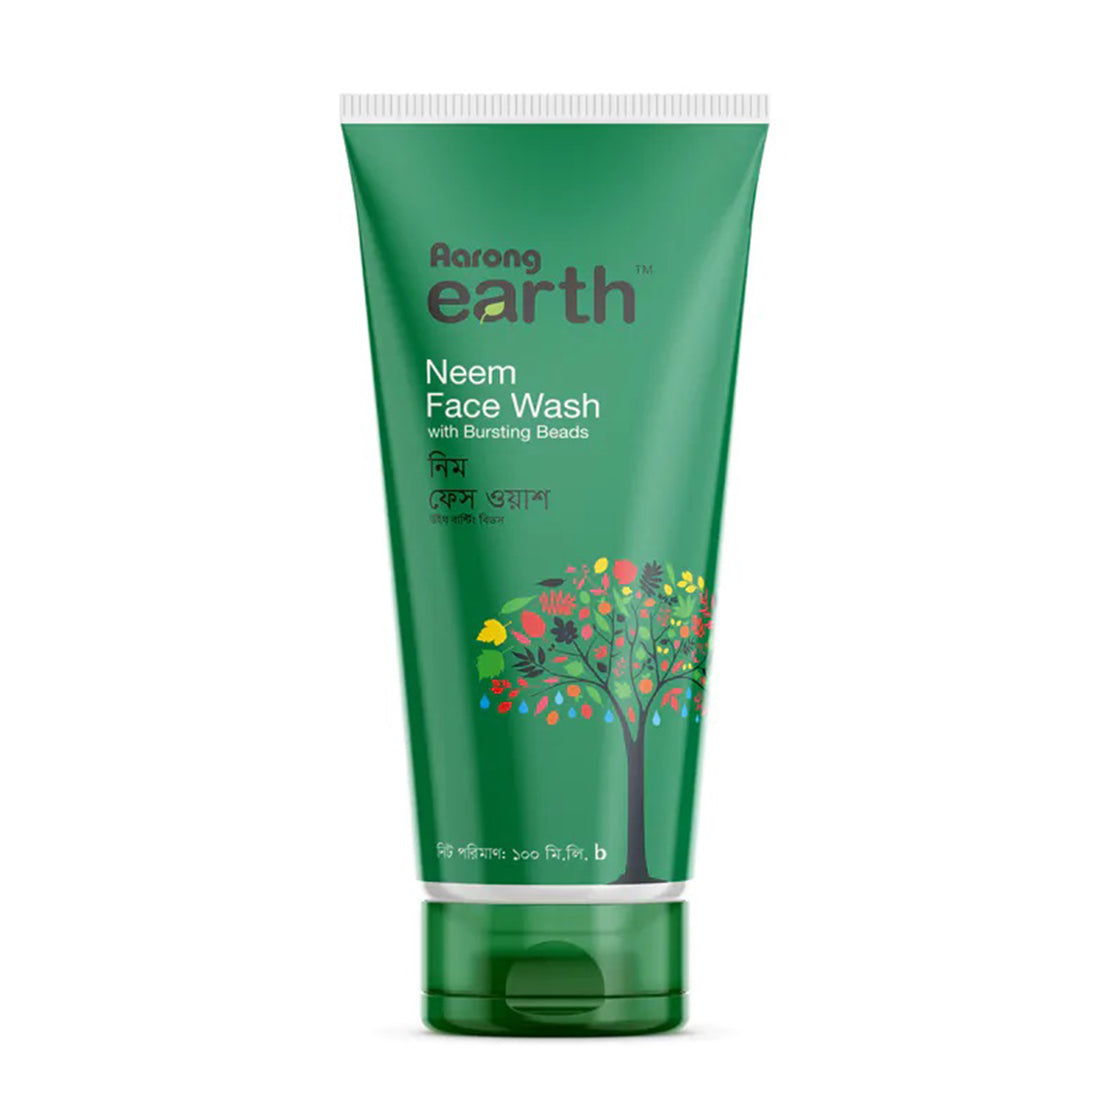 Aarong Earth Neem Face Wash with Bursting Beads (100ml)